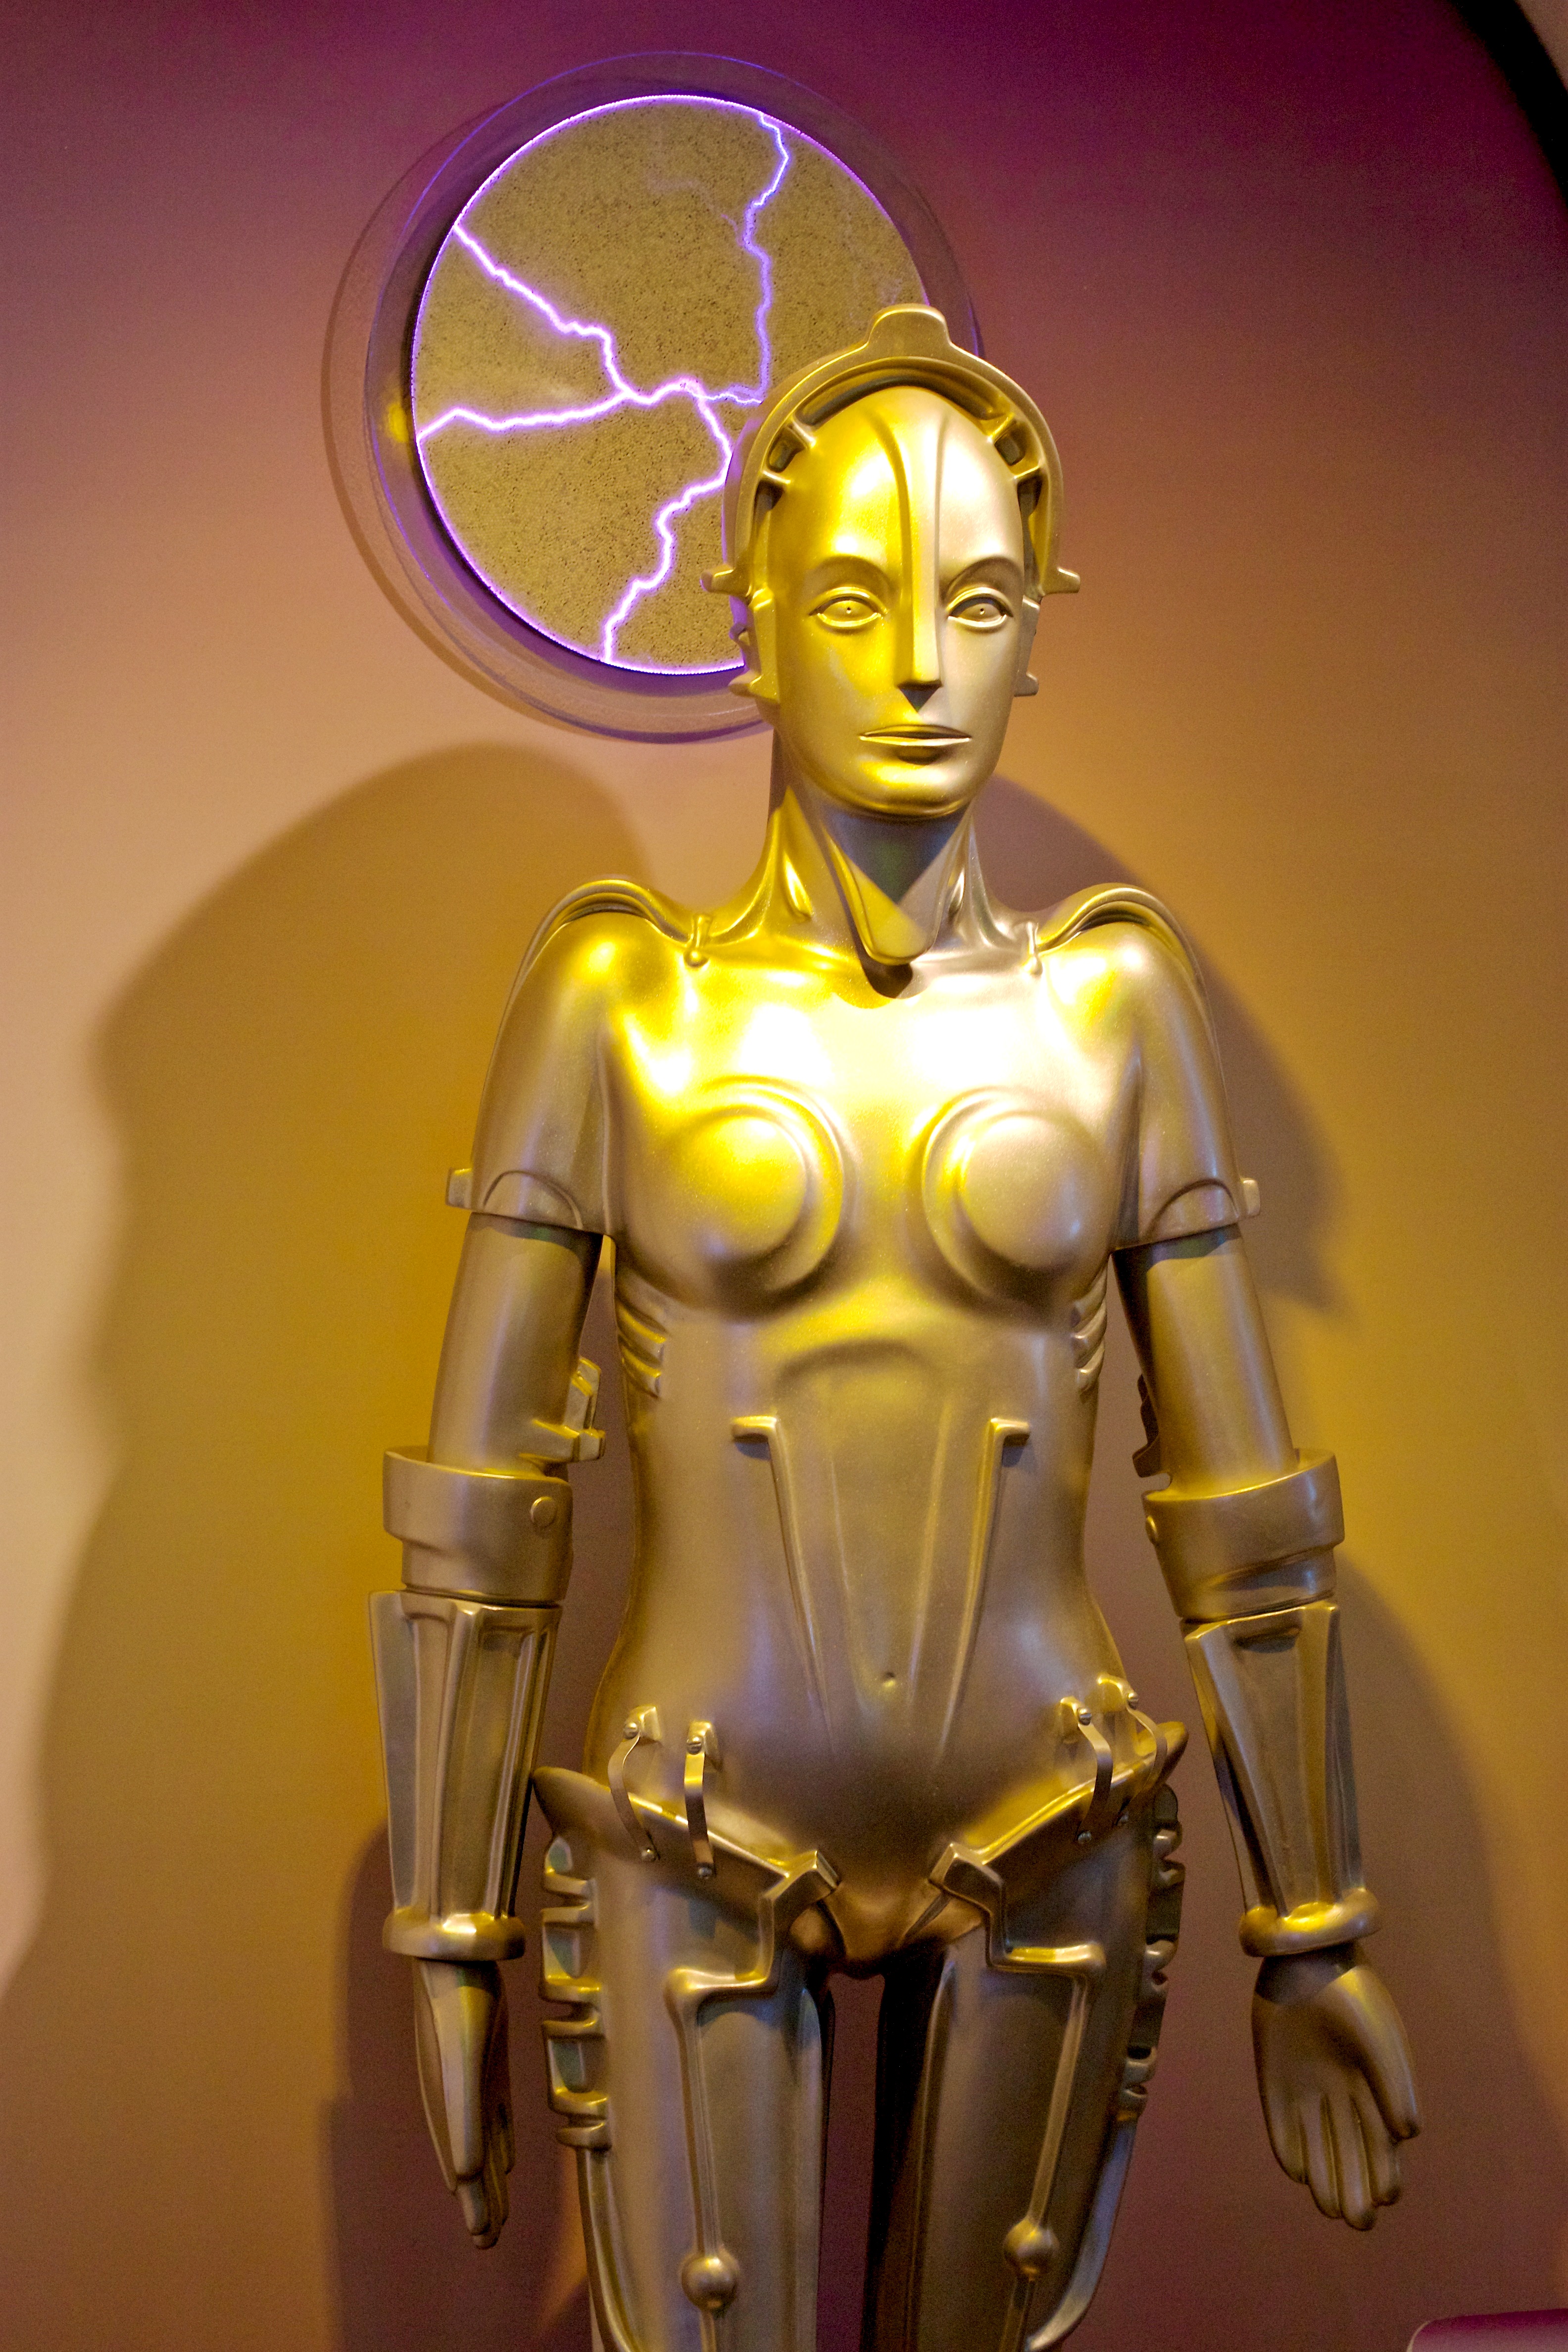 Maria_from_the_film_Metropolis%2C_on_display_at_the_Robot_Hall_of_Fame.jpg